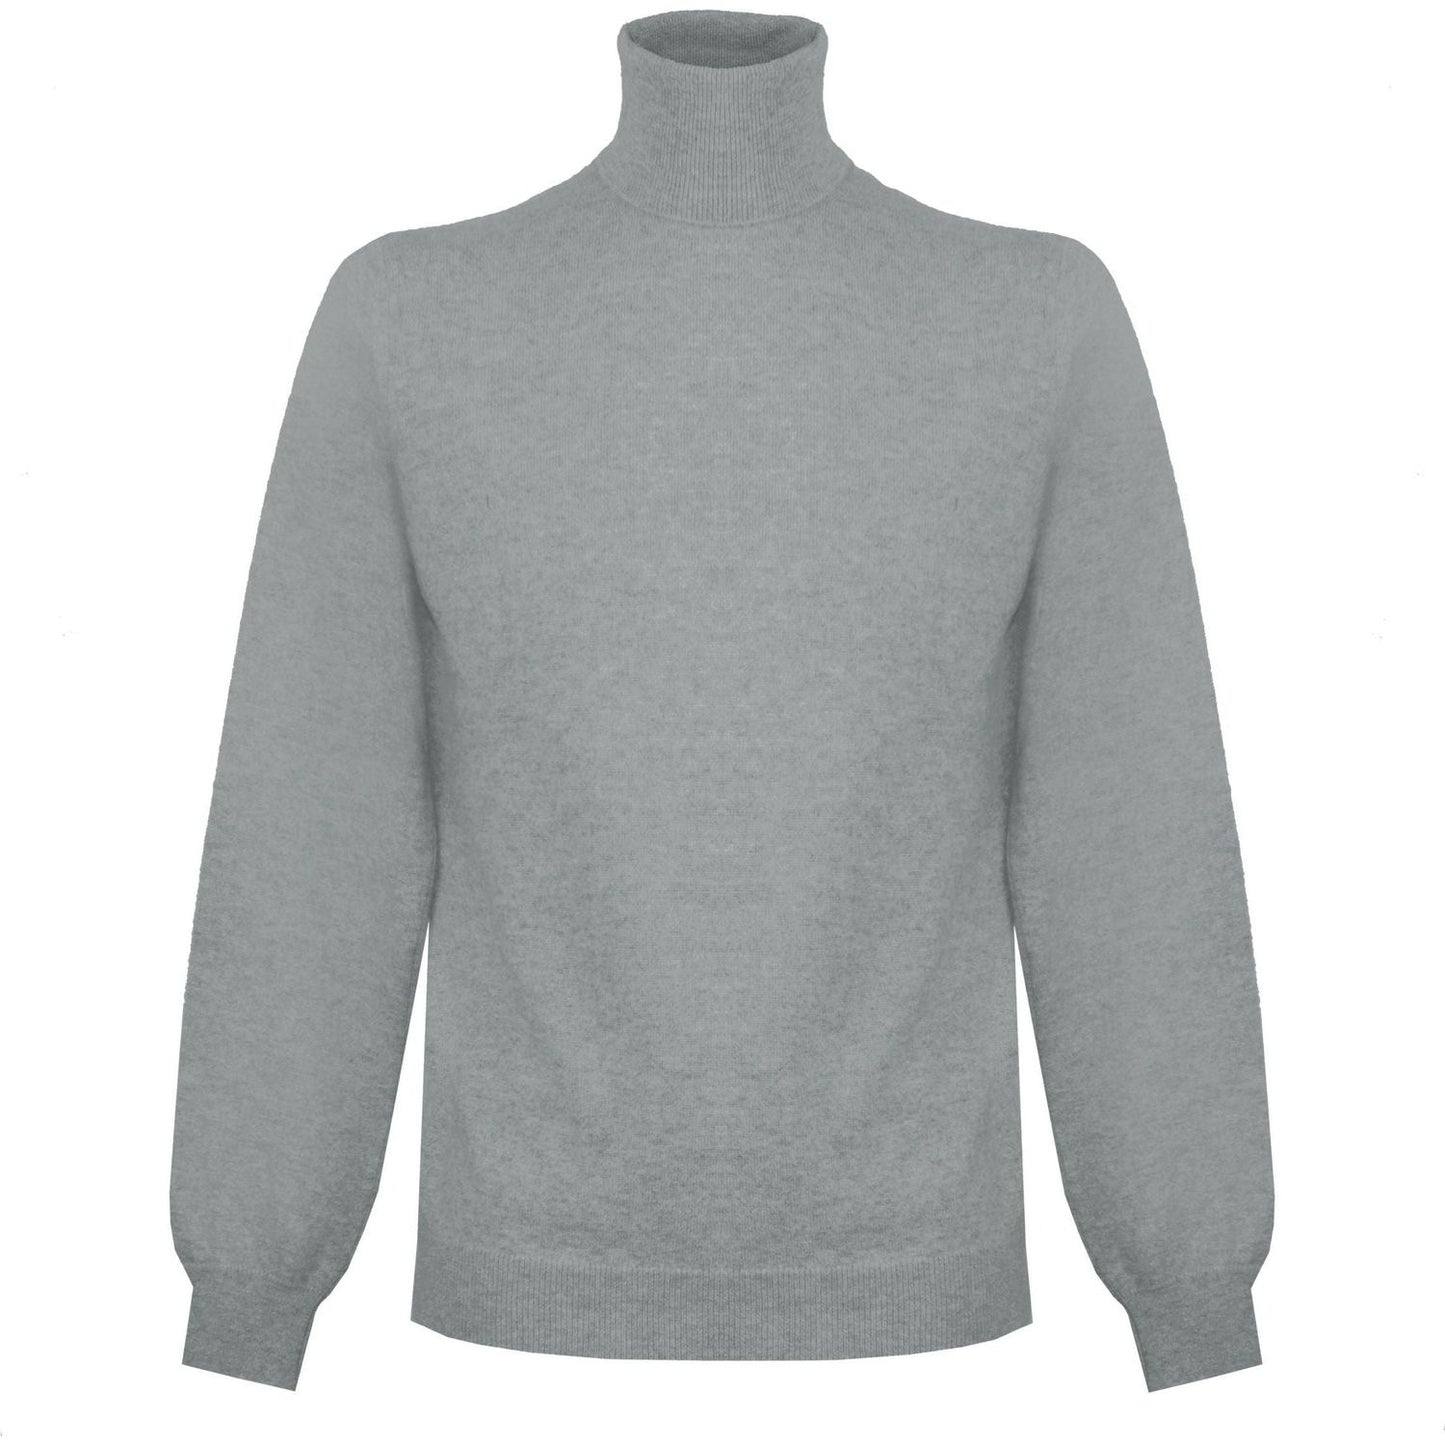 Malo Elevated Cashmere High Neck Sweater MAN SWEATERS gray-cashmere-sweater-3 product-7510-1303680789-48-scaled-aebe2be1-2cb.jpg